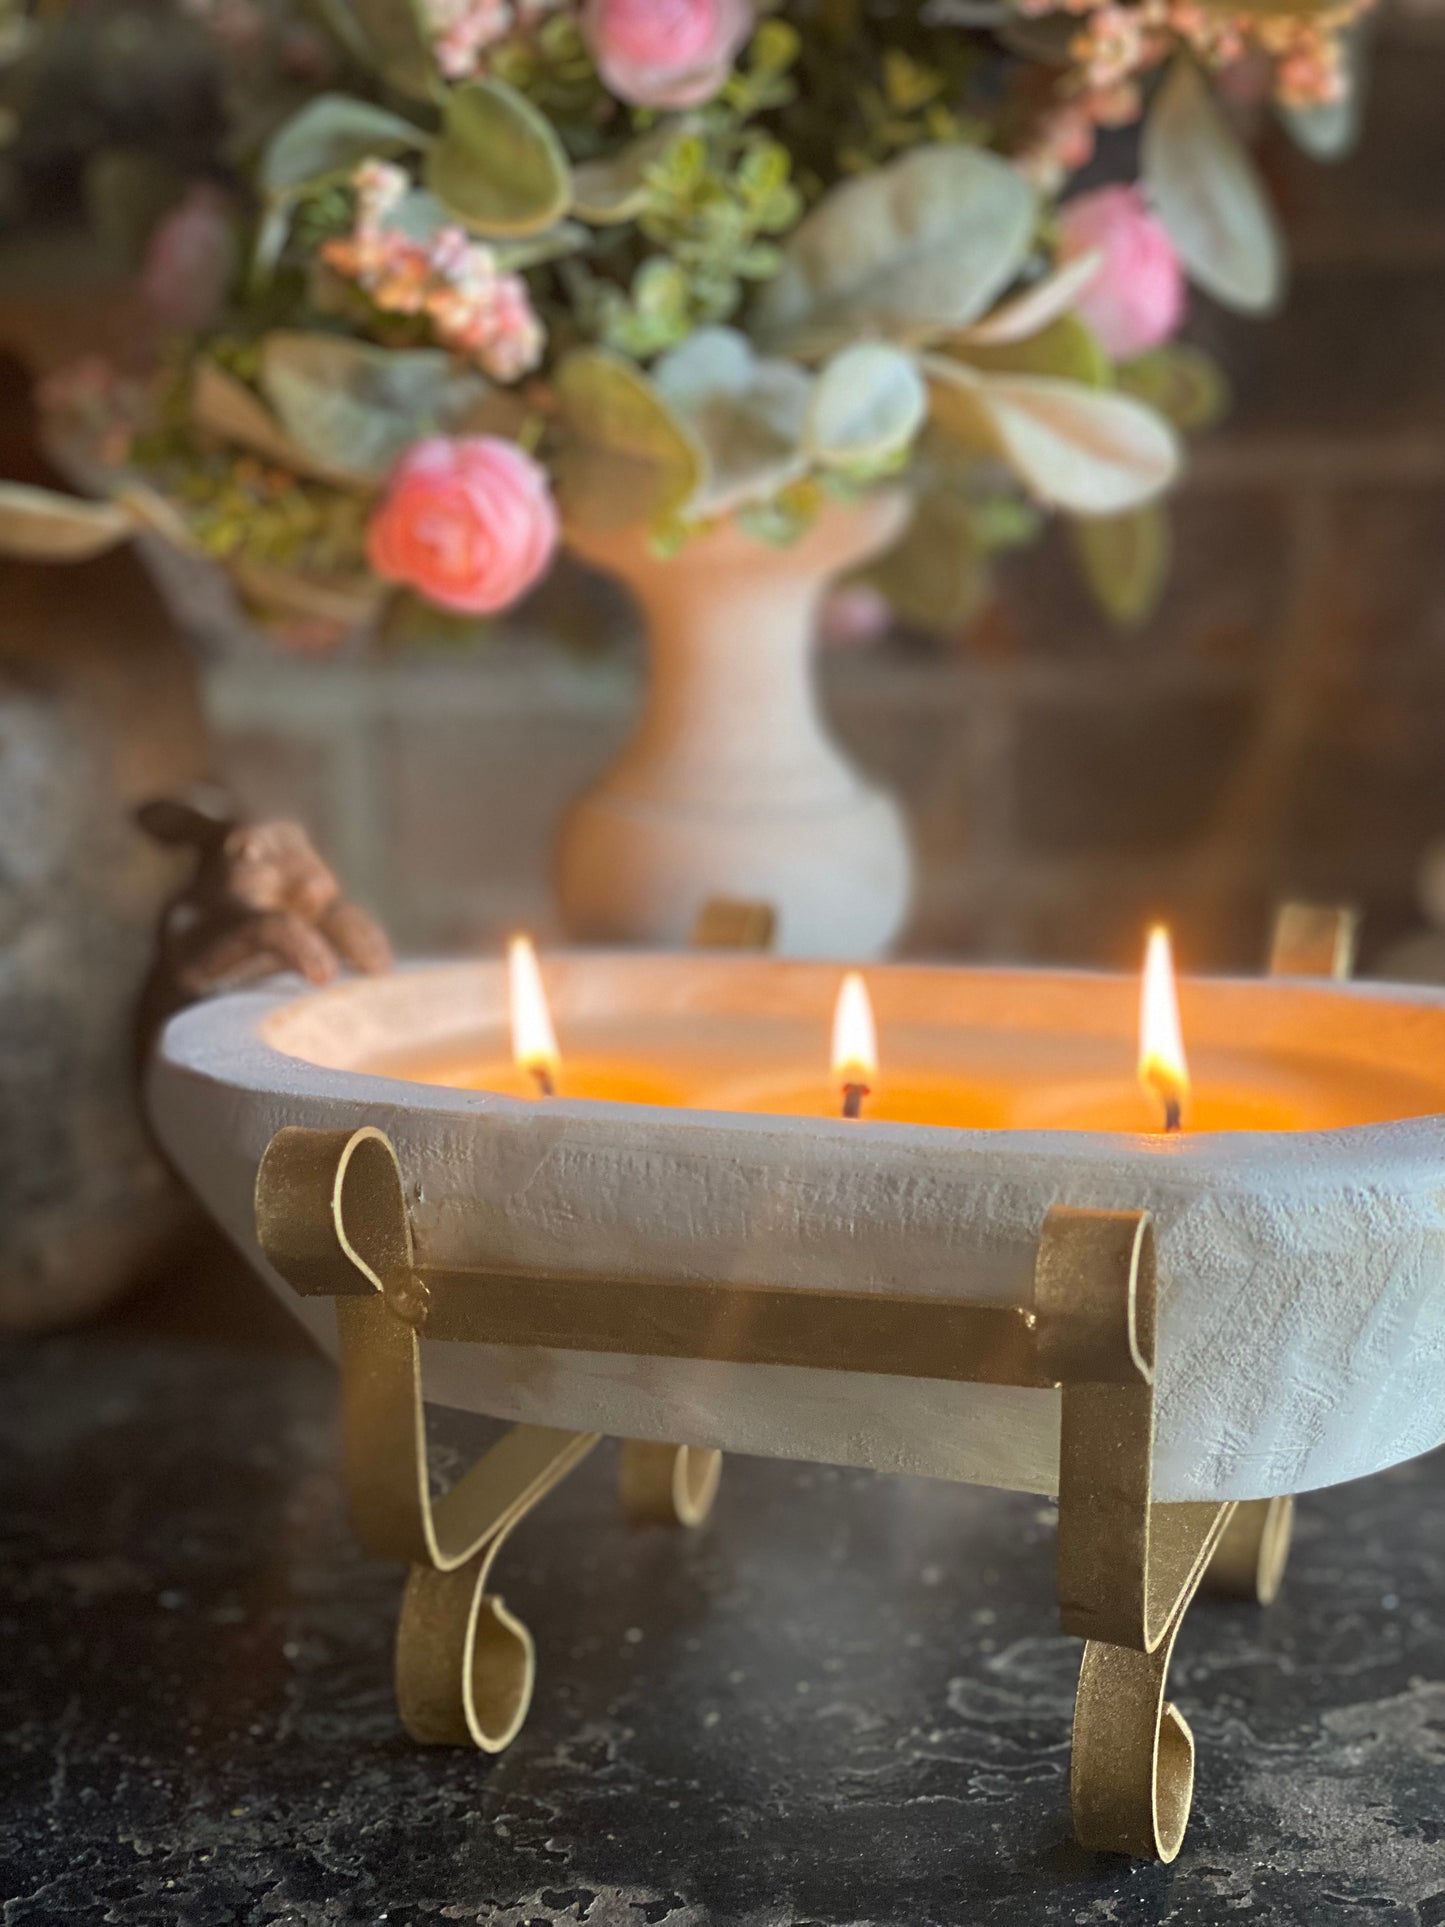 Stand - used for the 3 Wick Dough Bowl Candle